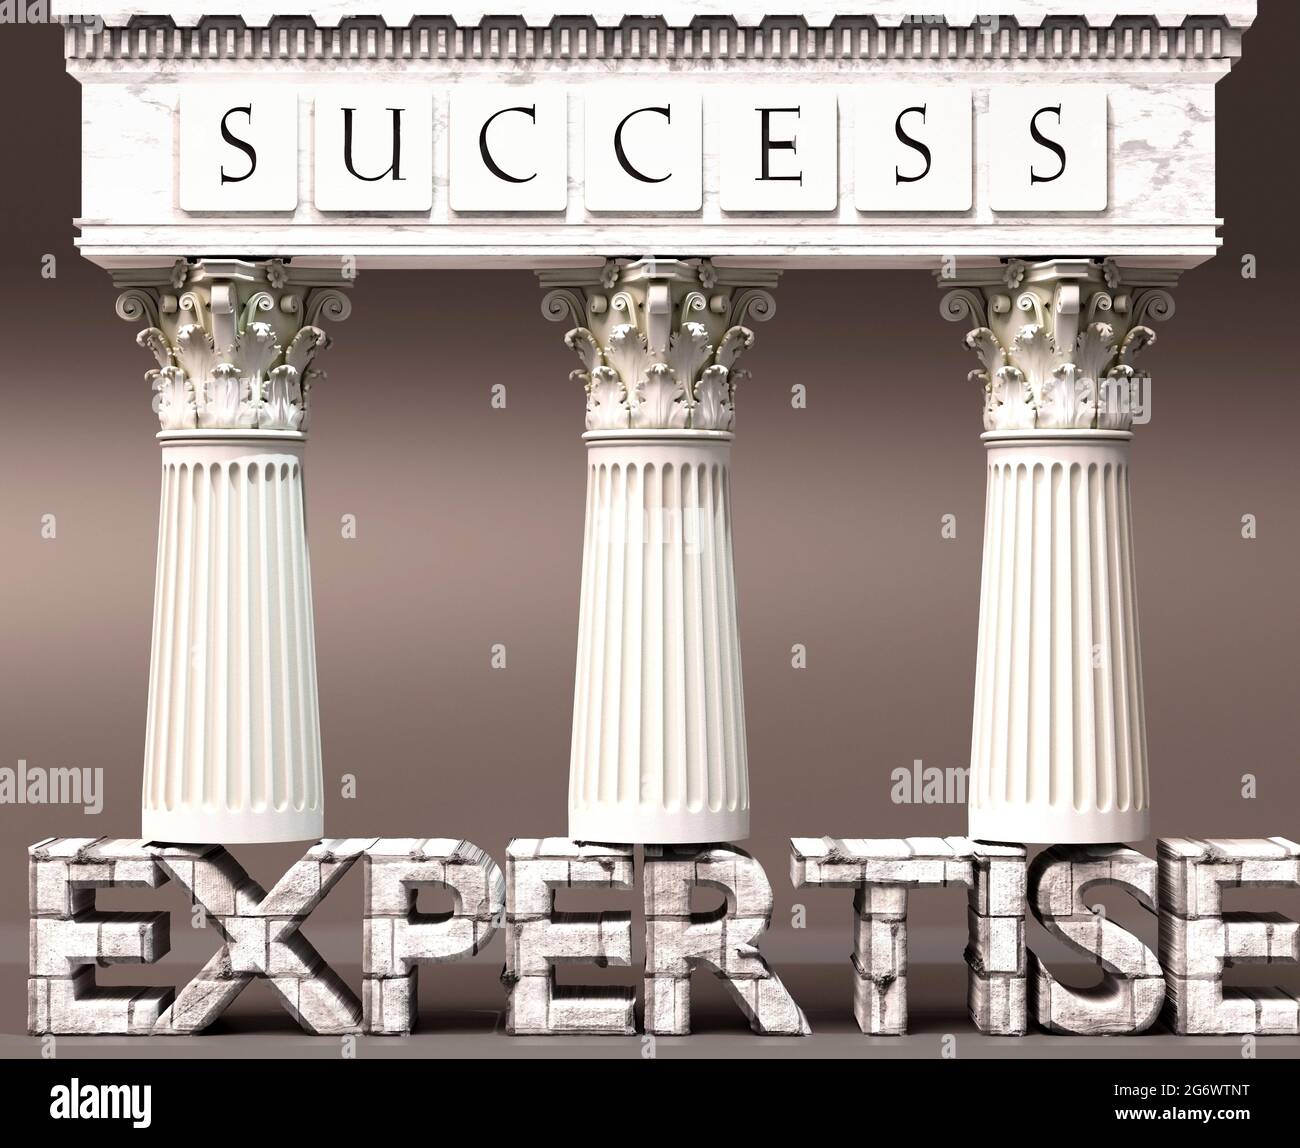 Expertise as a foundation of success - symbolized by pillars of success supported by Expertise to show that it is essential for reaching goals and ach Stock Photo